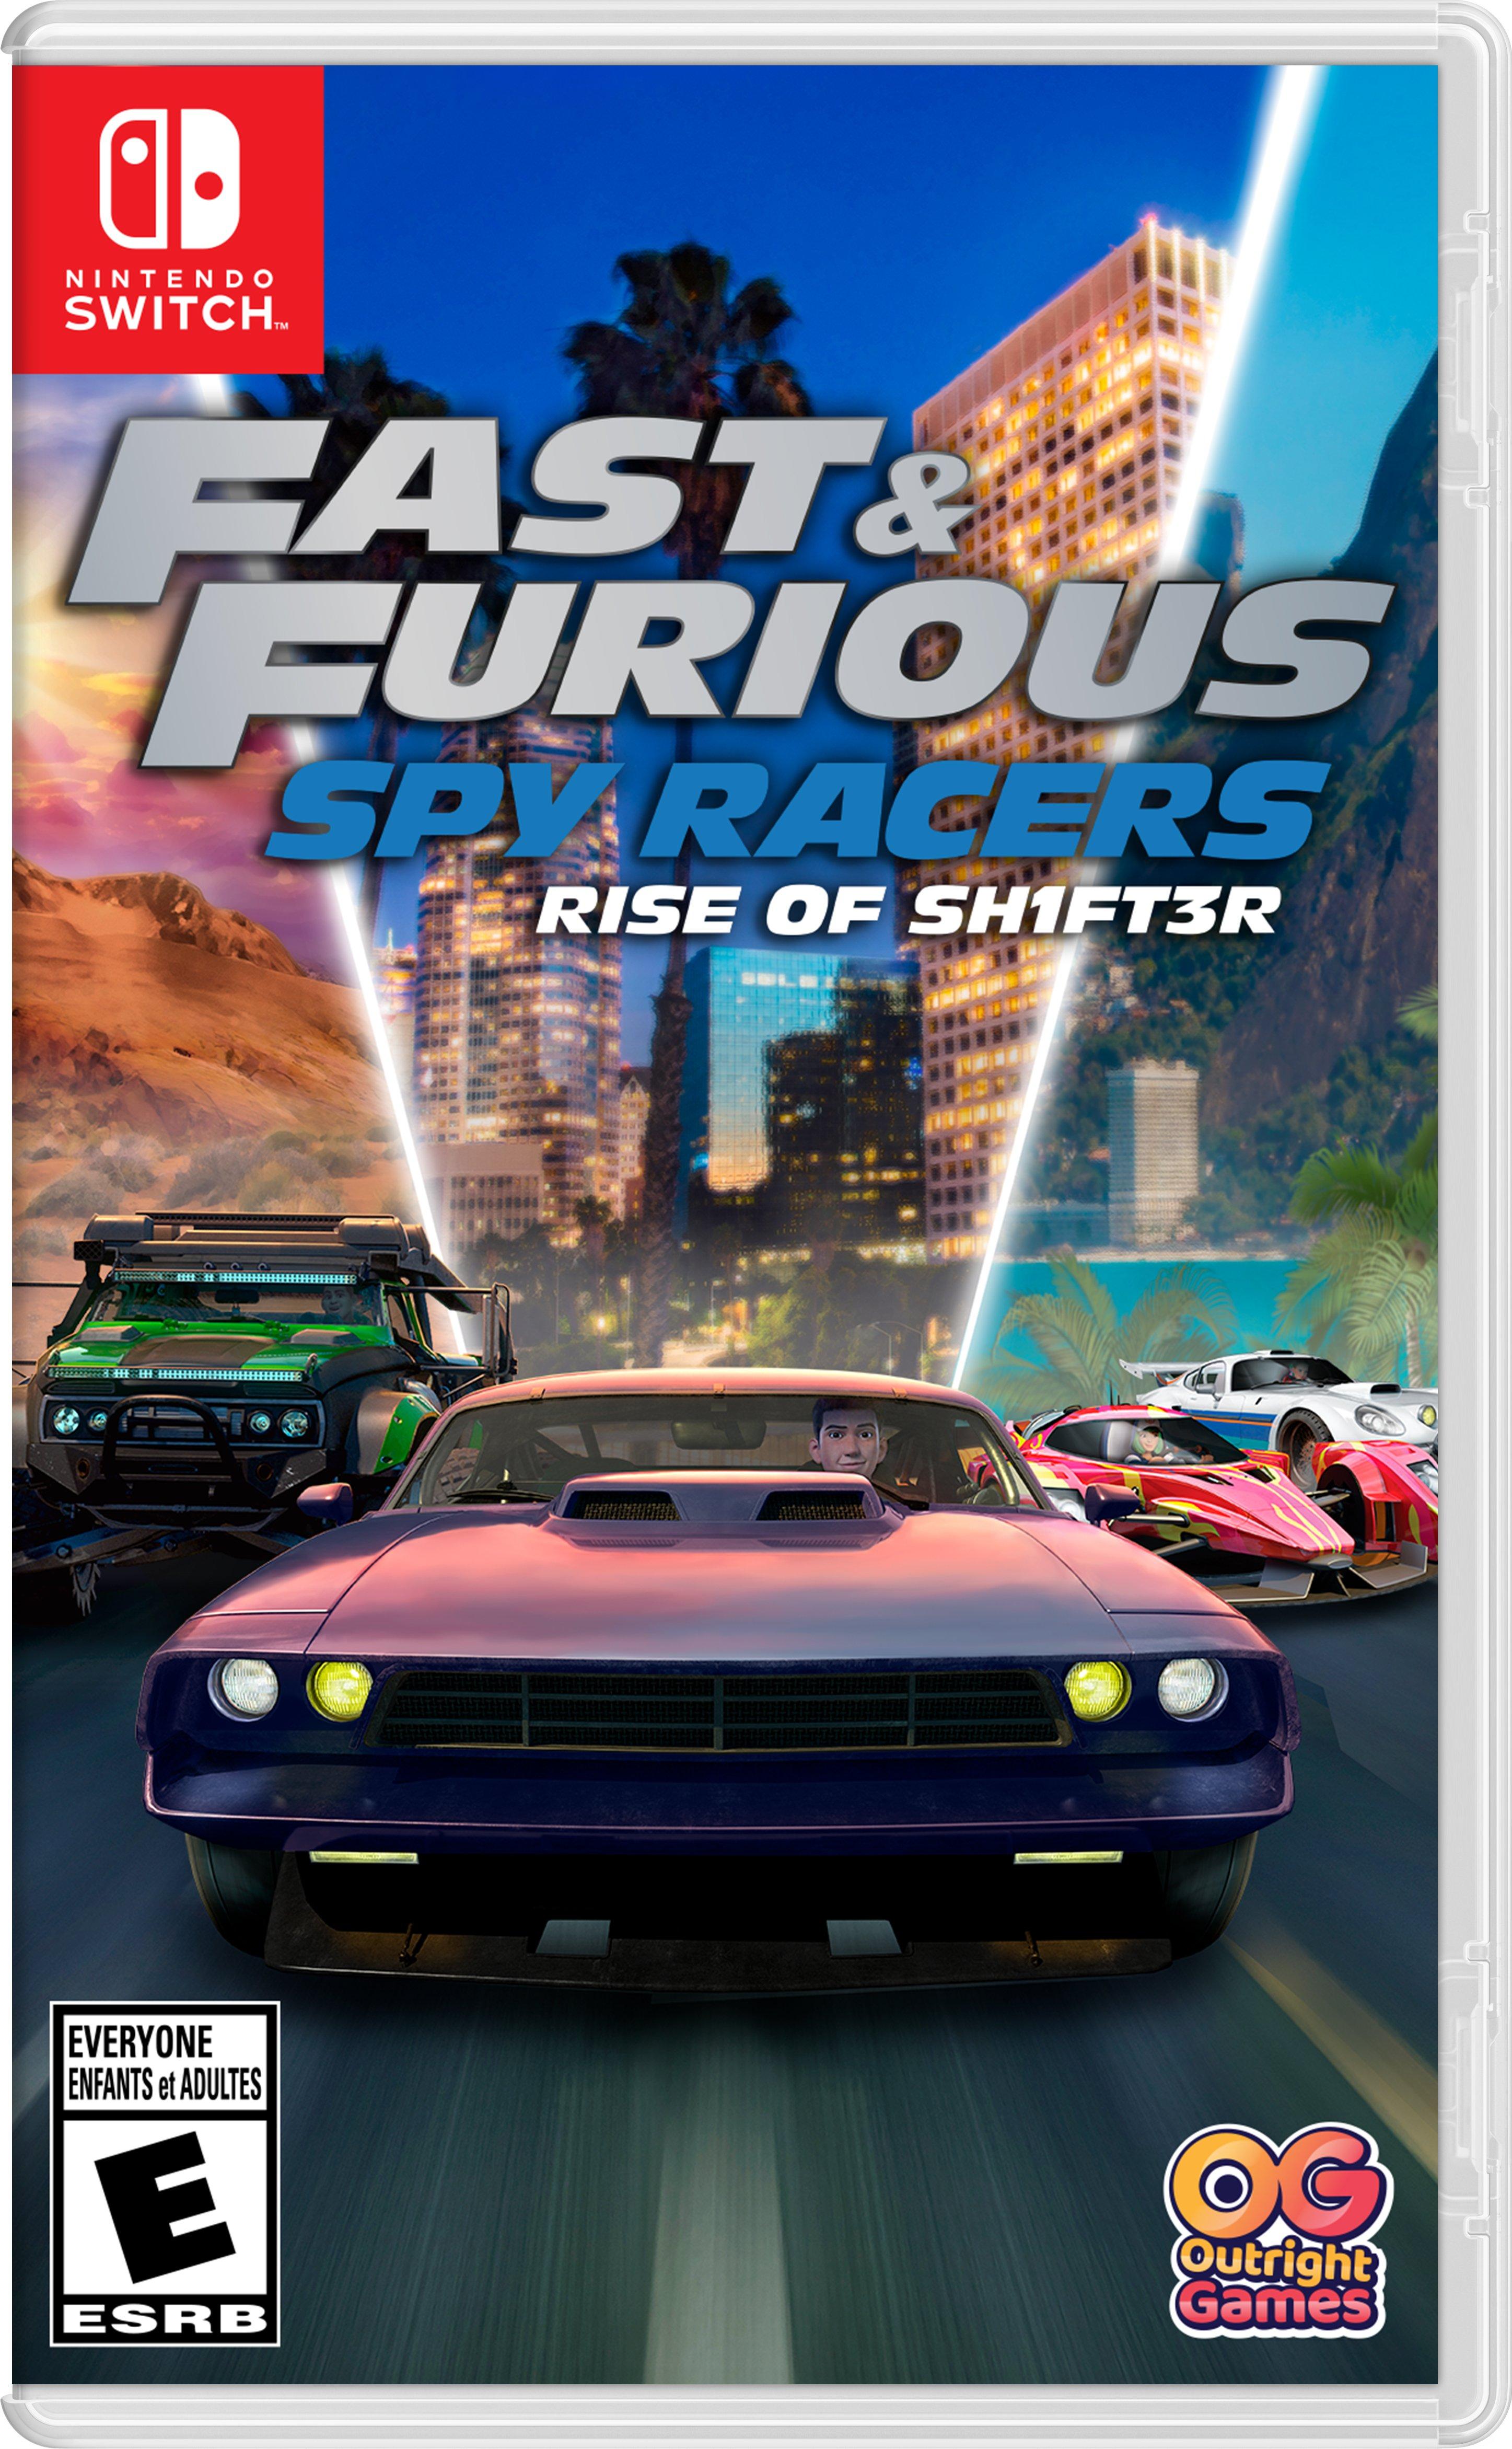 Fast and Furious: Spy Racers Rise of SH1FT3R - Nintendo Switch